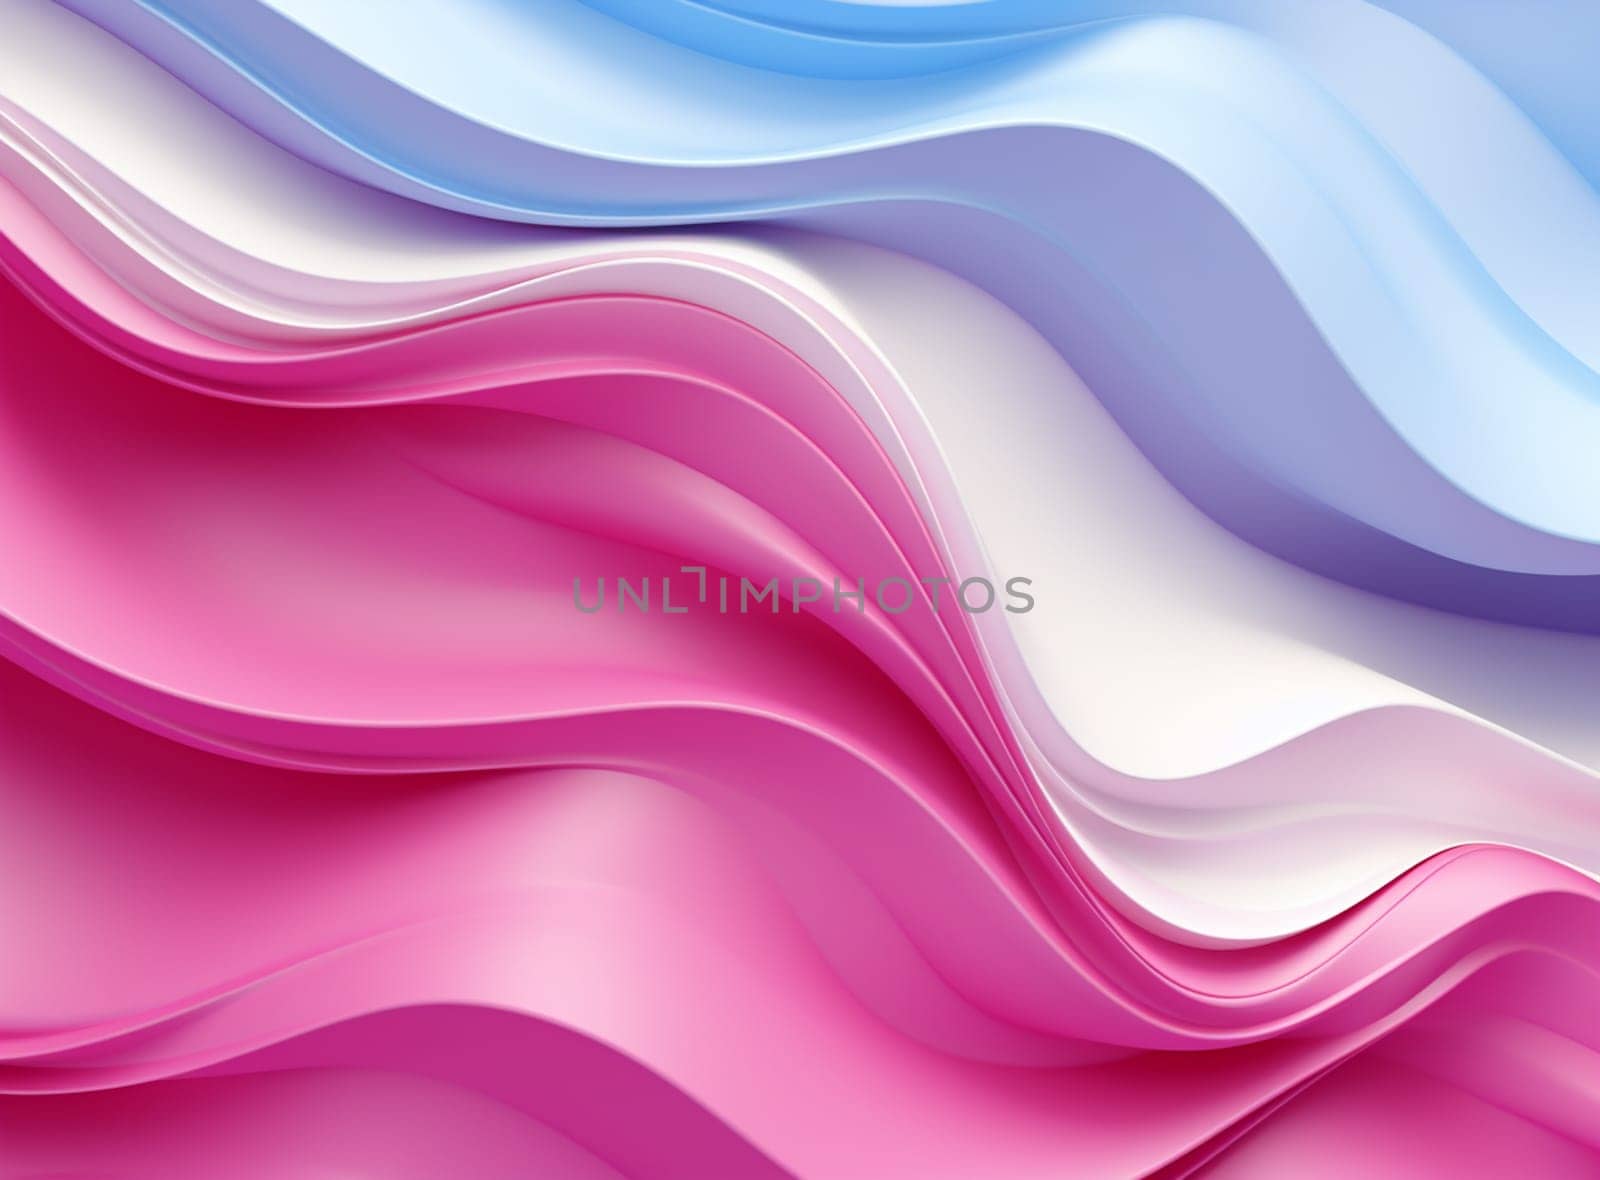 an abstract 3D image of digital waves in shades of Pink, Blue and purple - wave illustration. . High quality photo